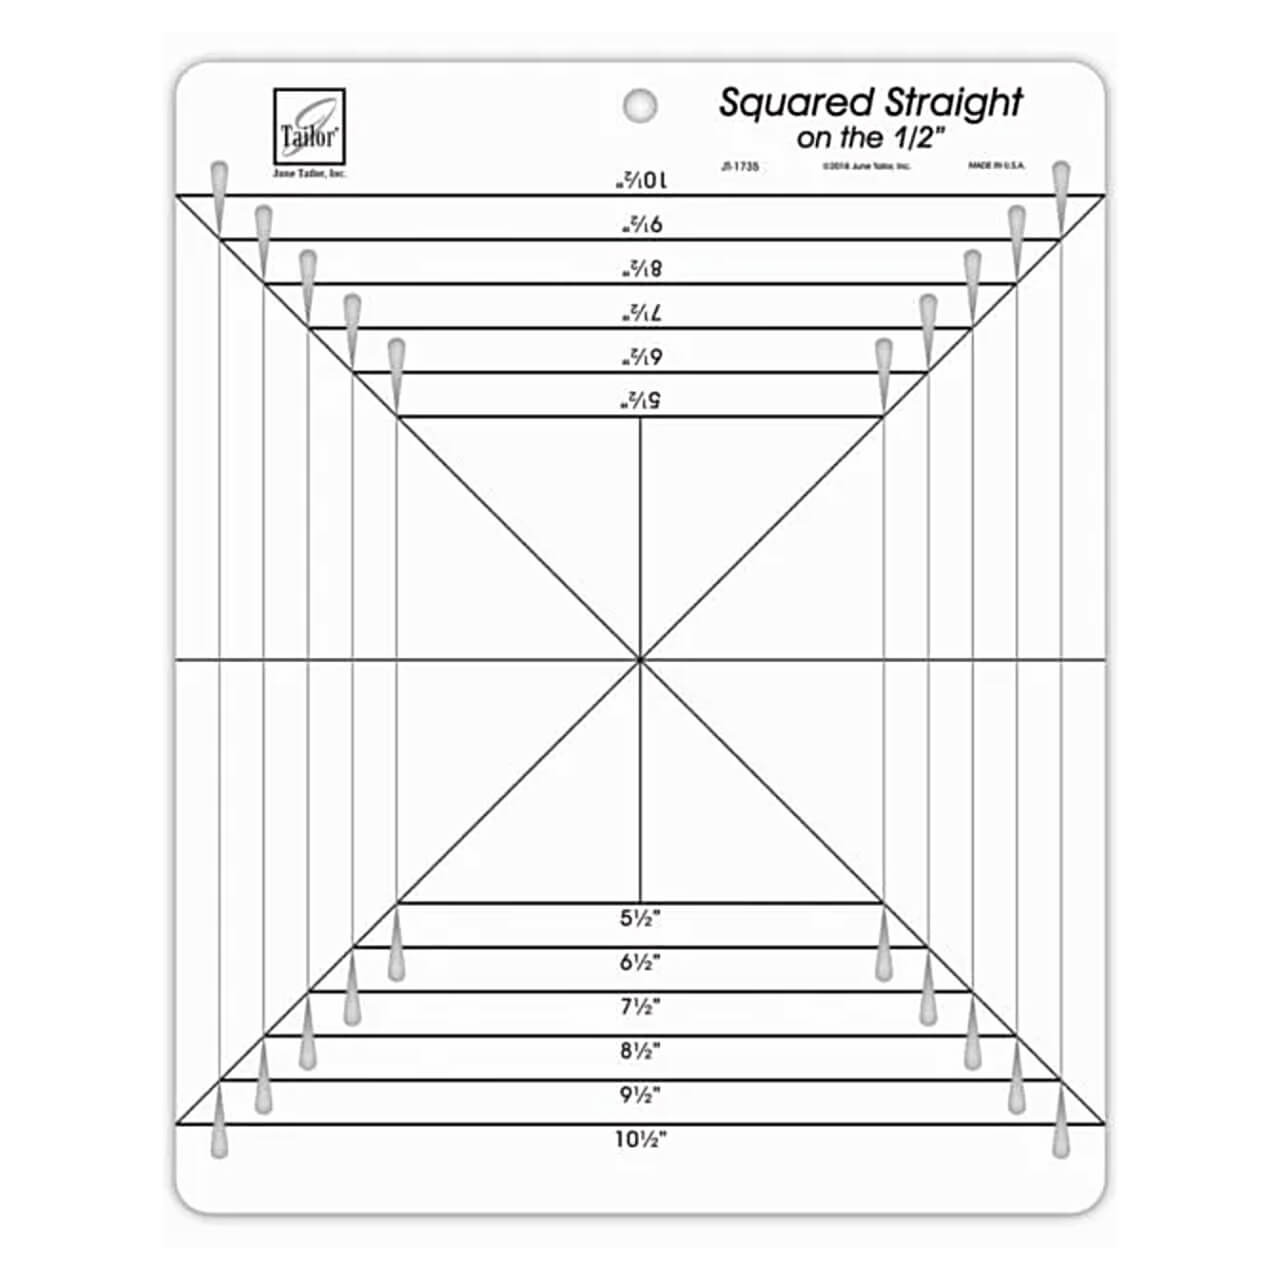 June Tailor Squared Straight on the Half Inch Ruler with half-inch grid increments for precise quilting